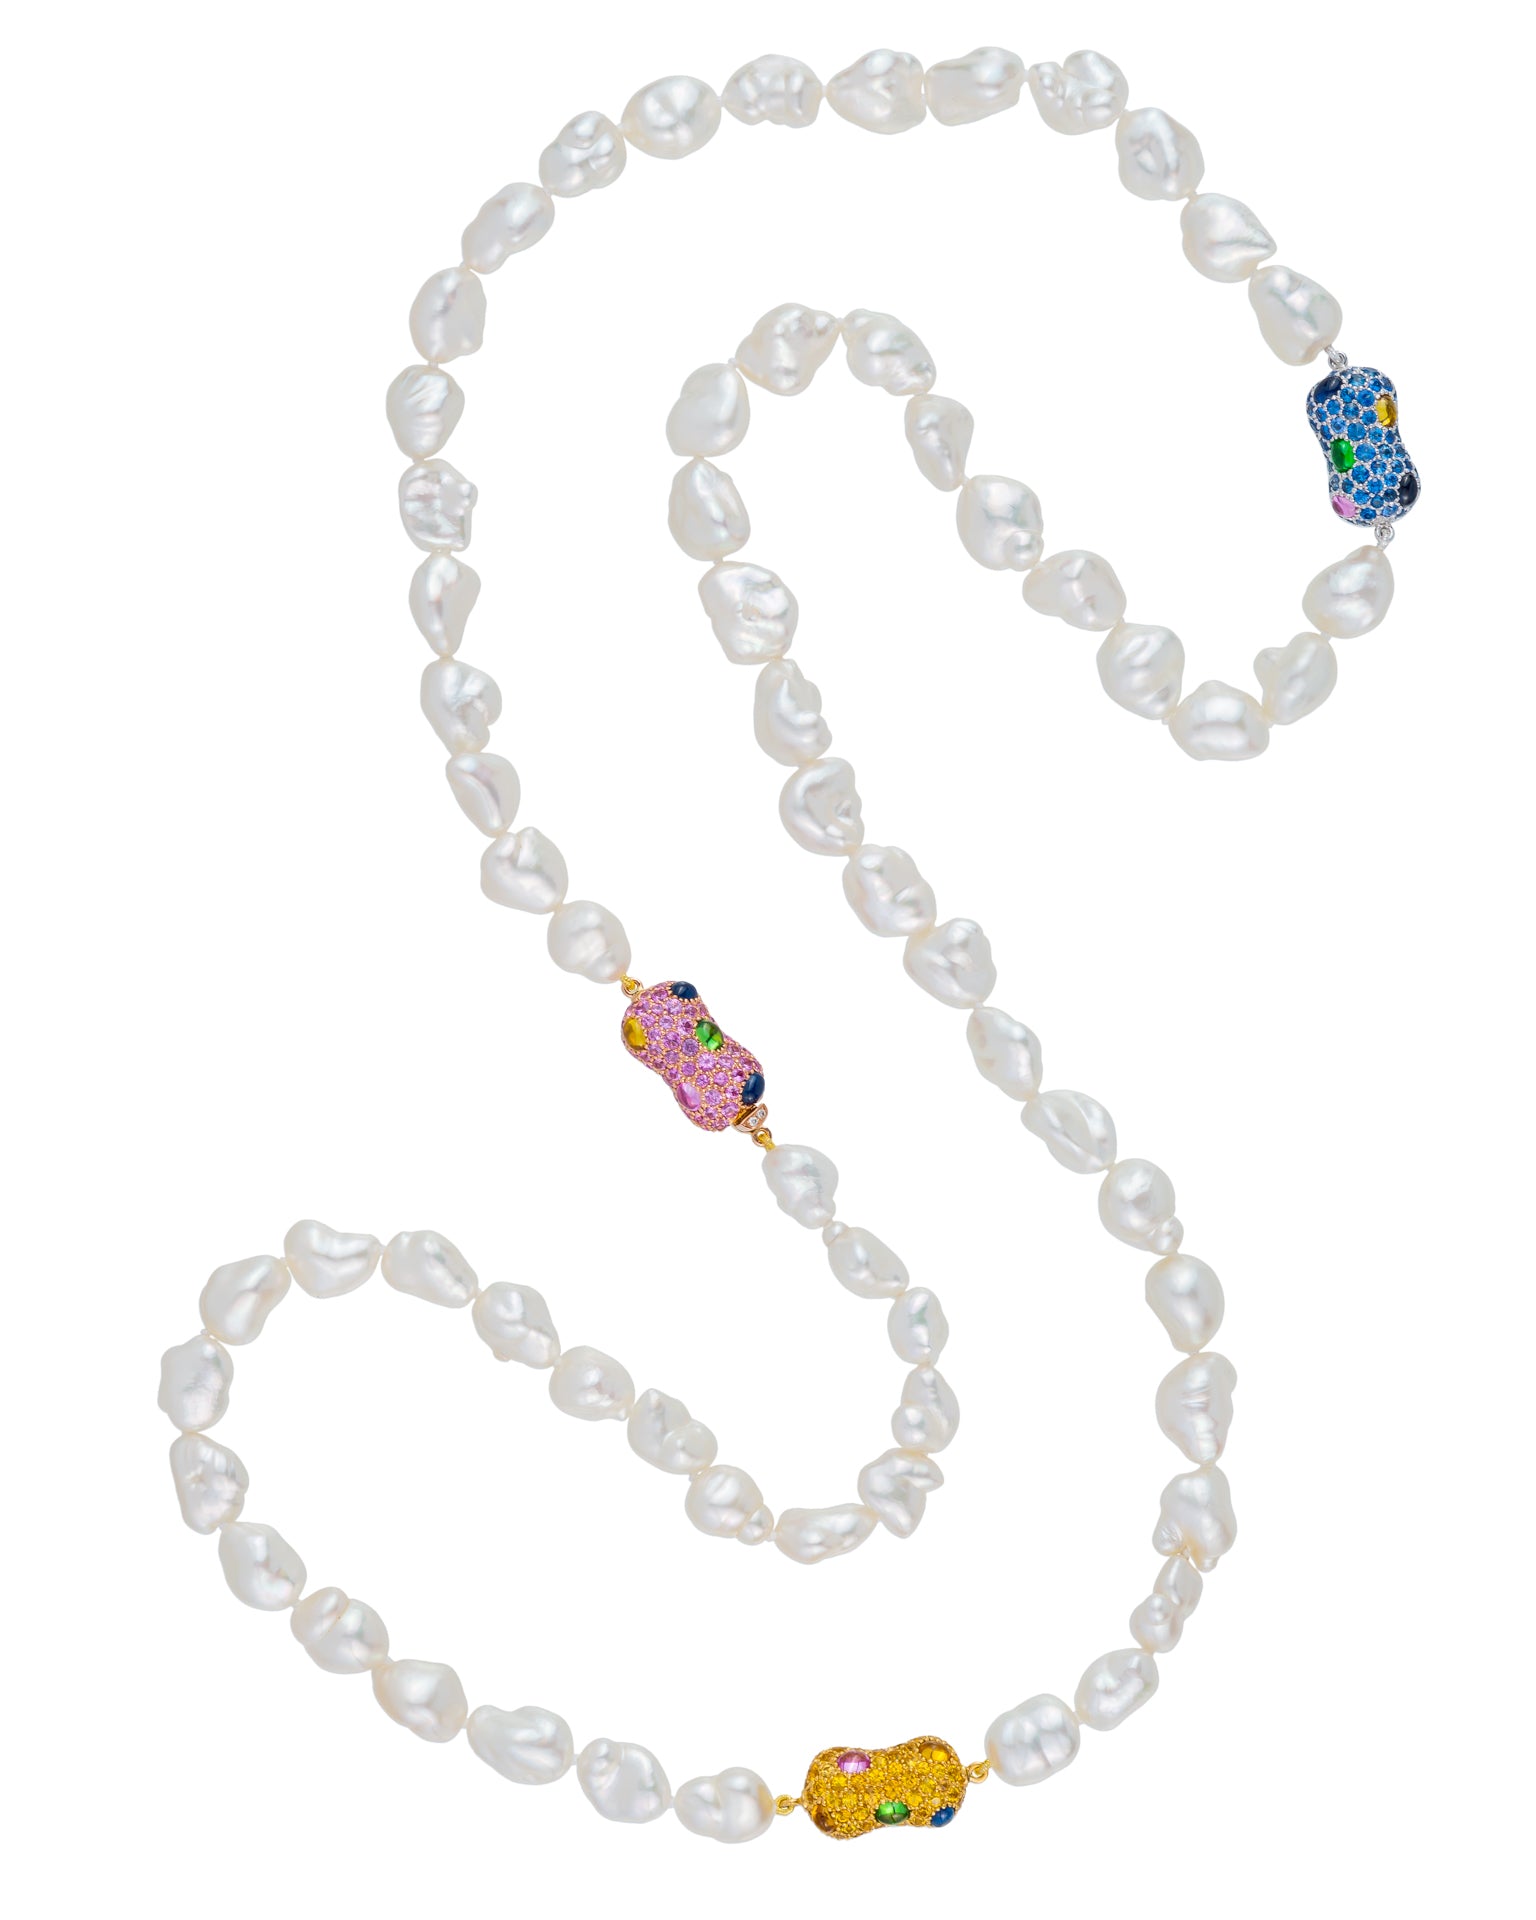 South Sea Keshi pearl necklace with 'peanut' enhancers set with a myriad of gemstones, crafted in 18 karat yellow, white and rose gold.